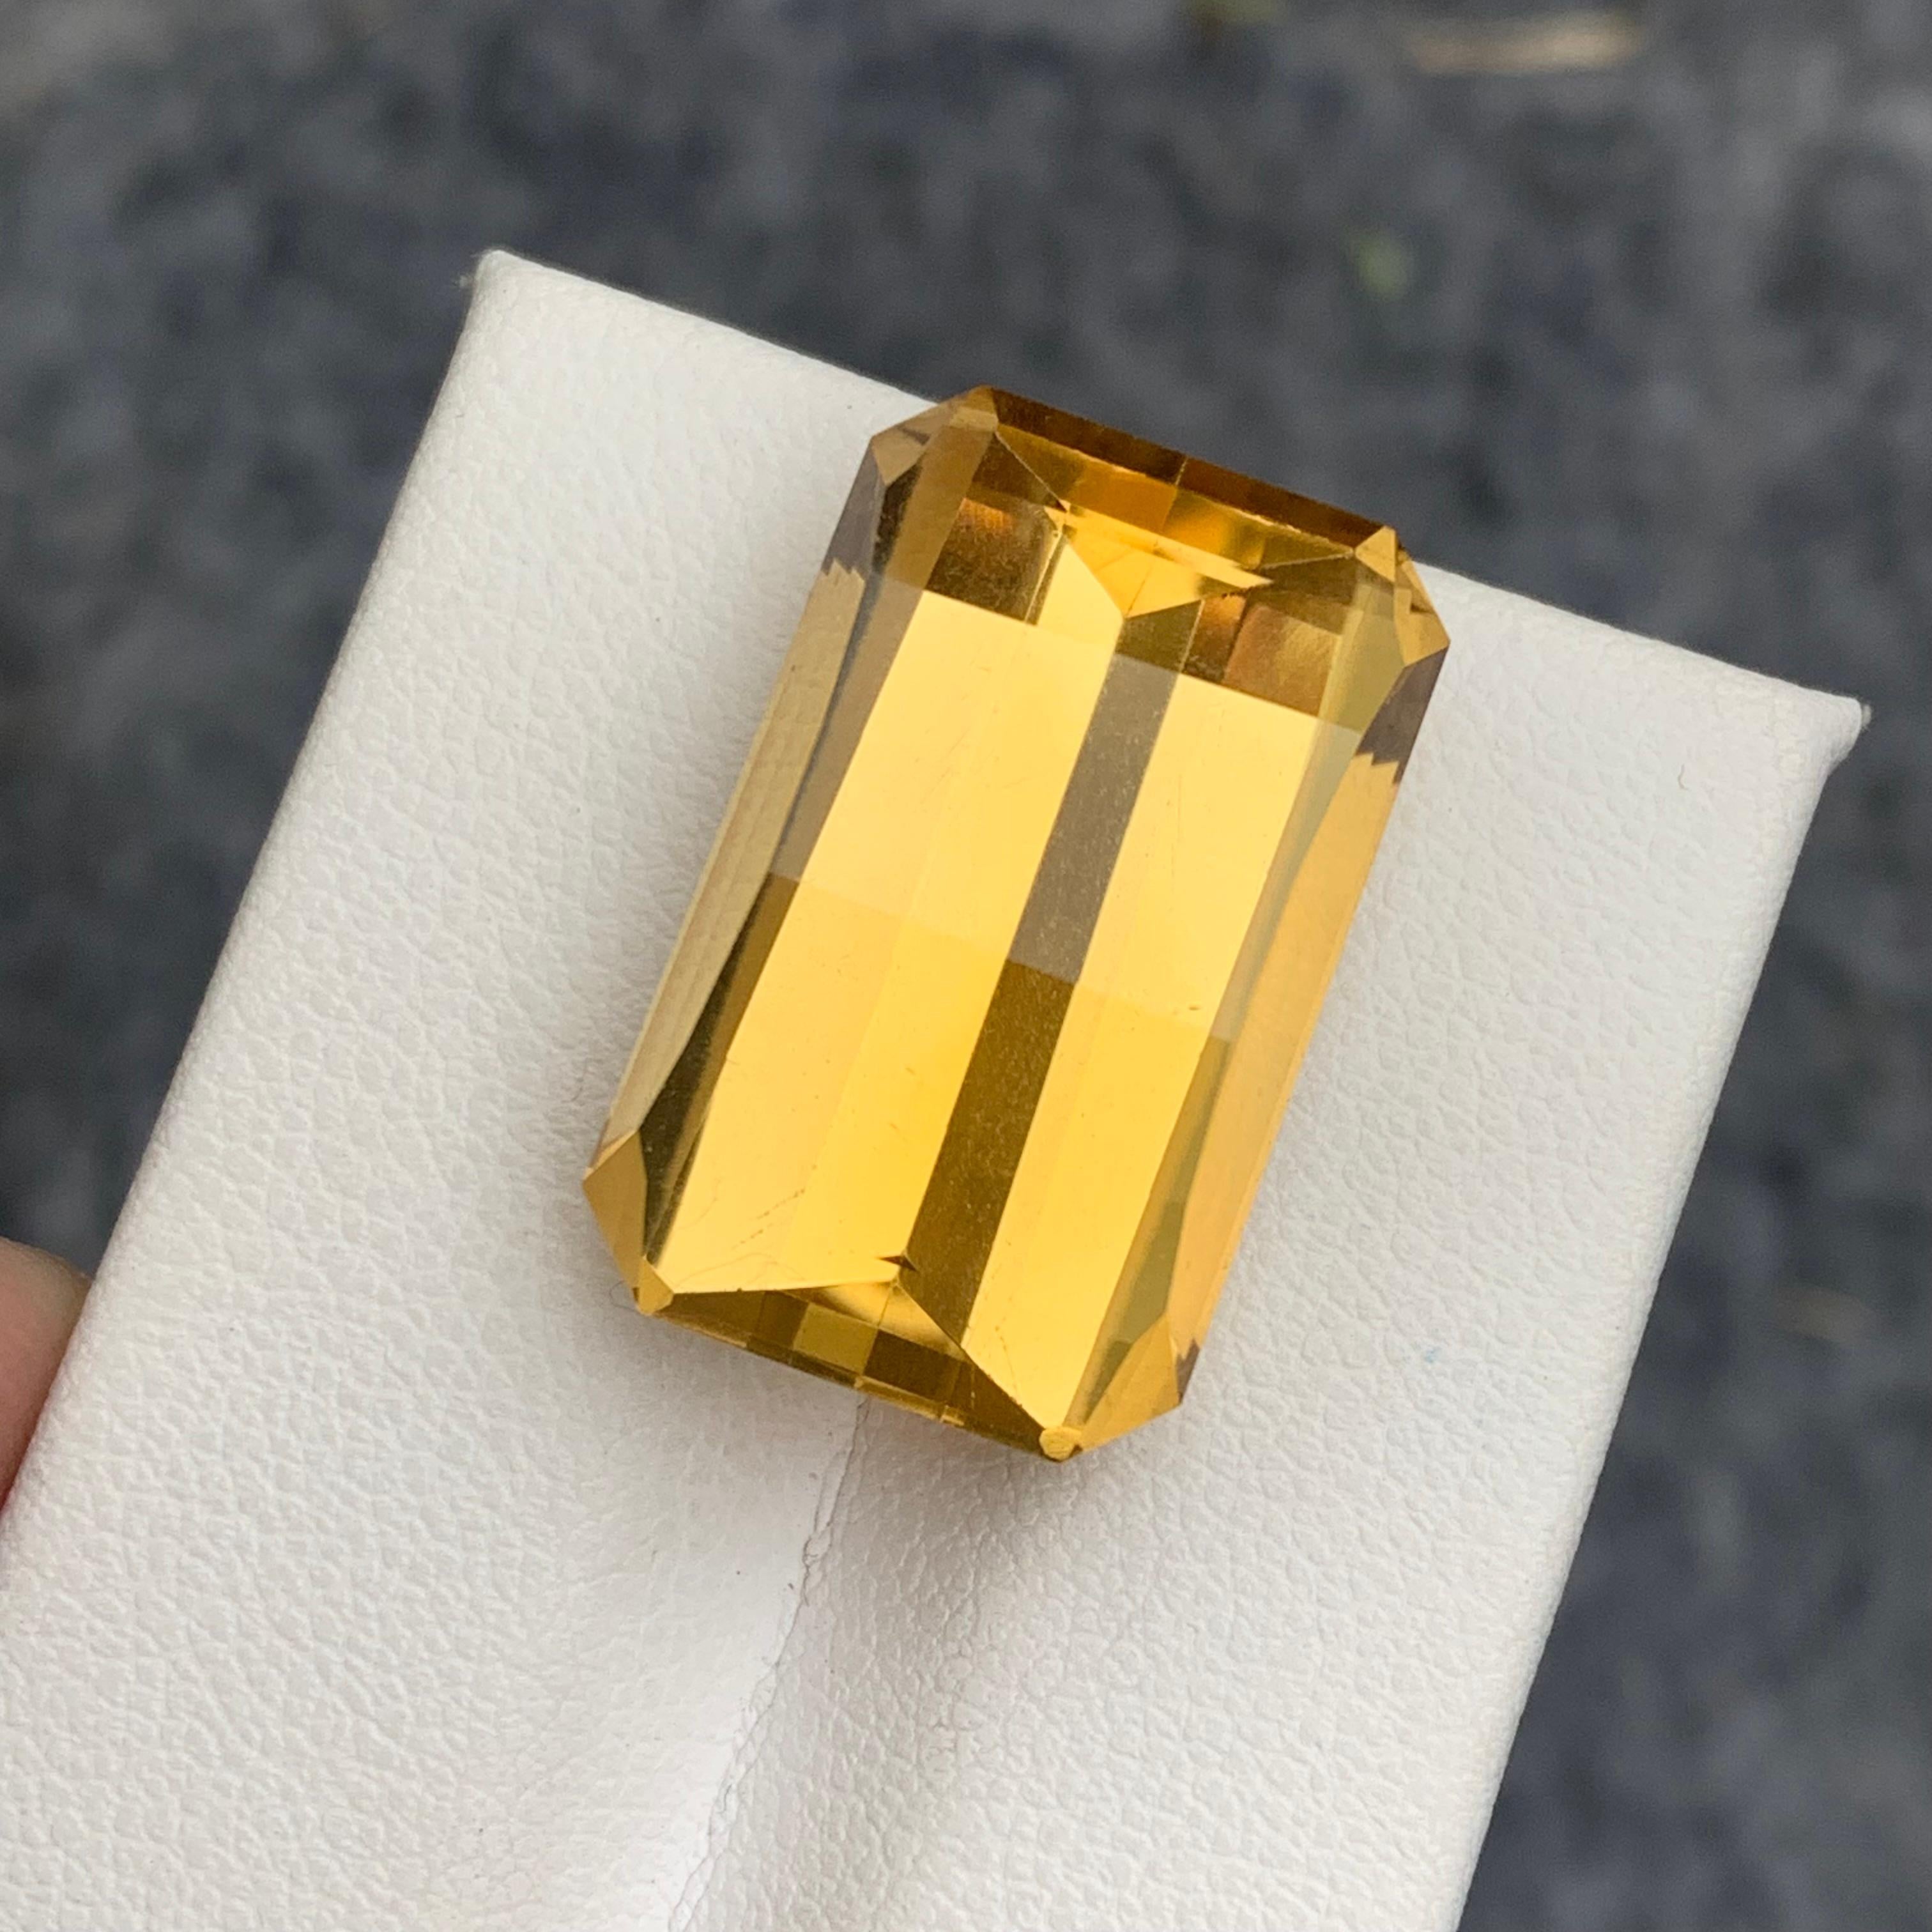 Women's or Men's Genuine 24.15 Carat Natural Yellow Citrine Pixel Bar Cut Gemstone from Brazil For Sale